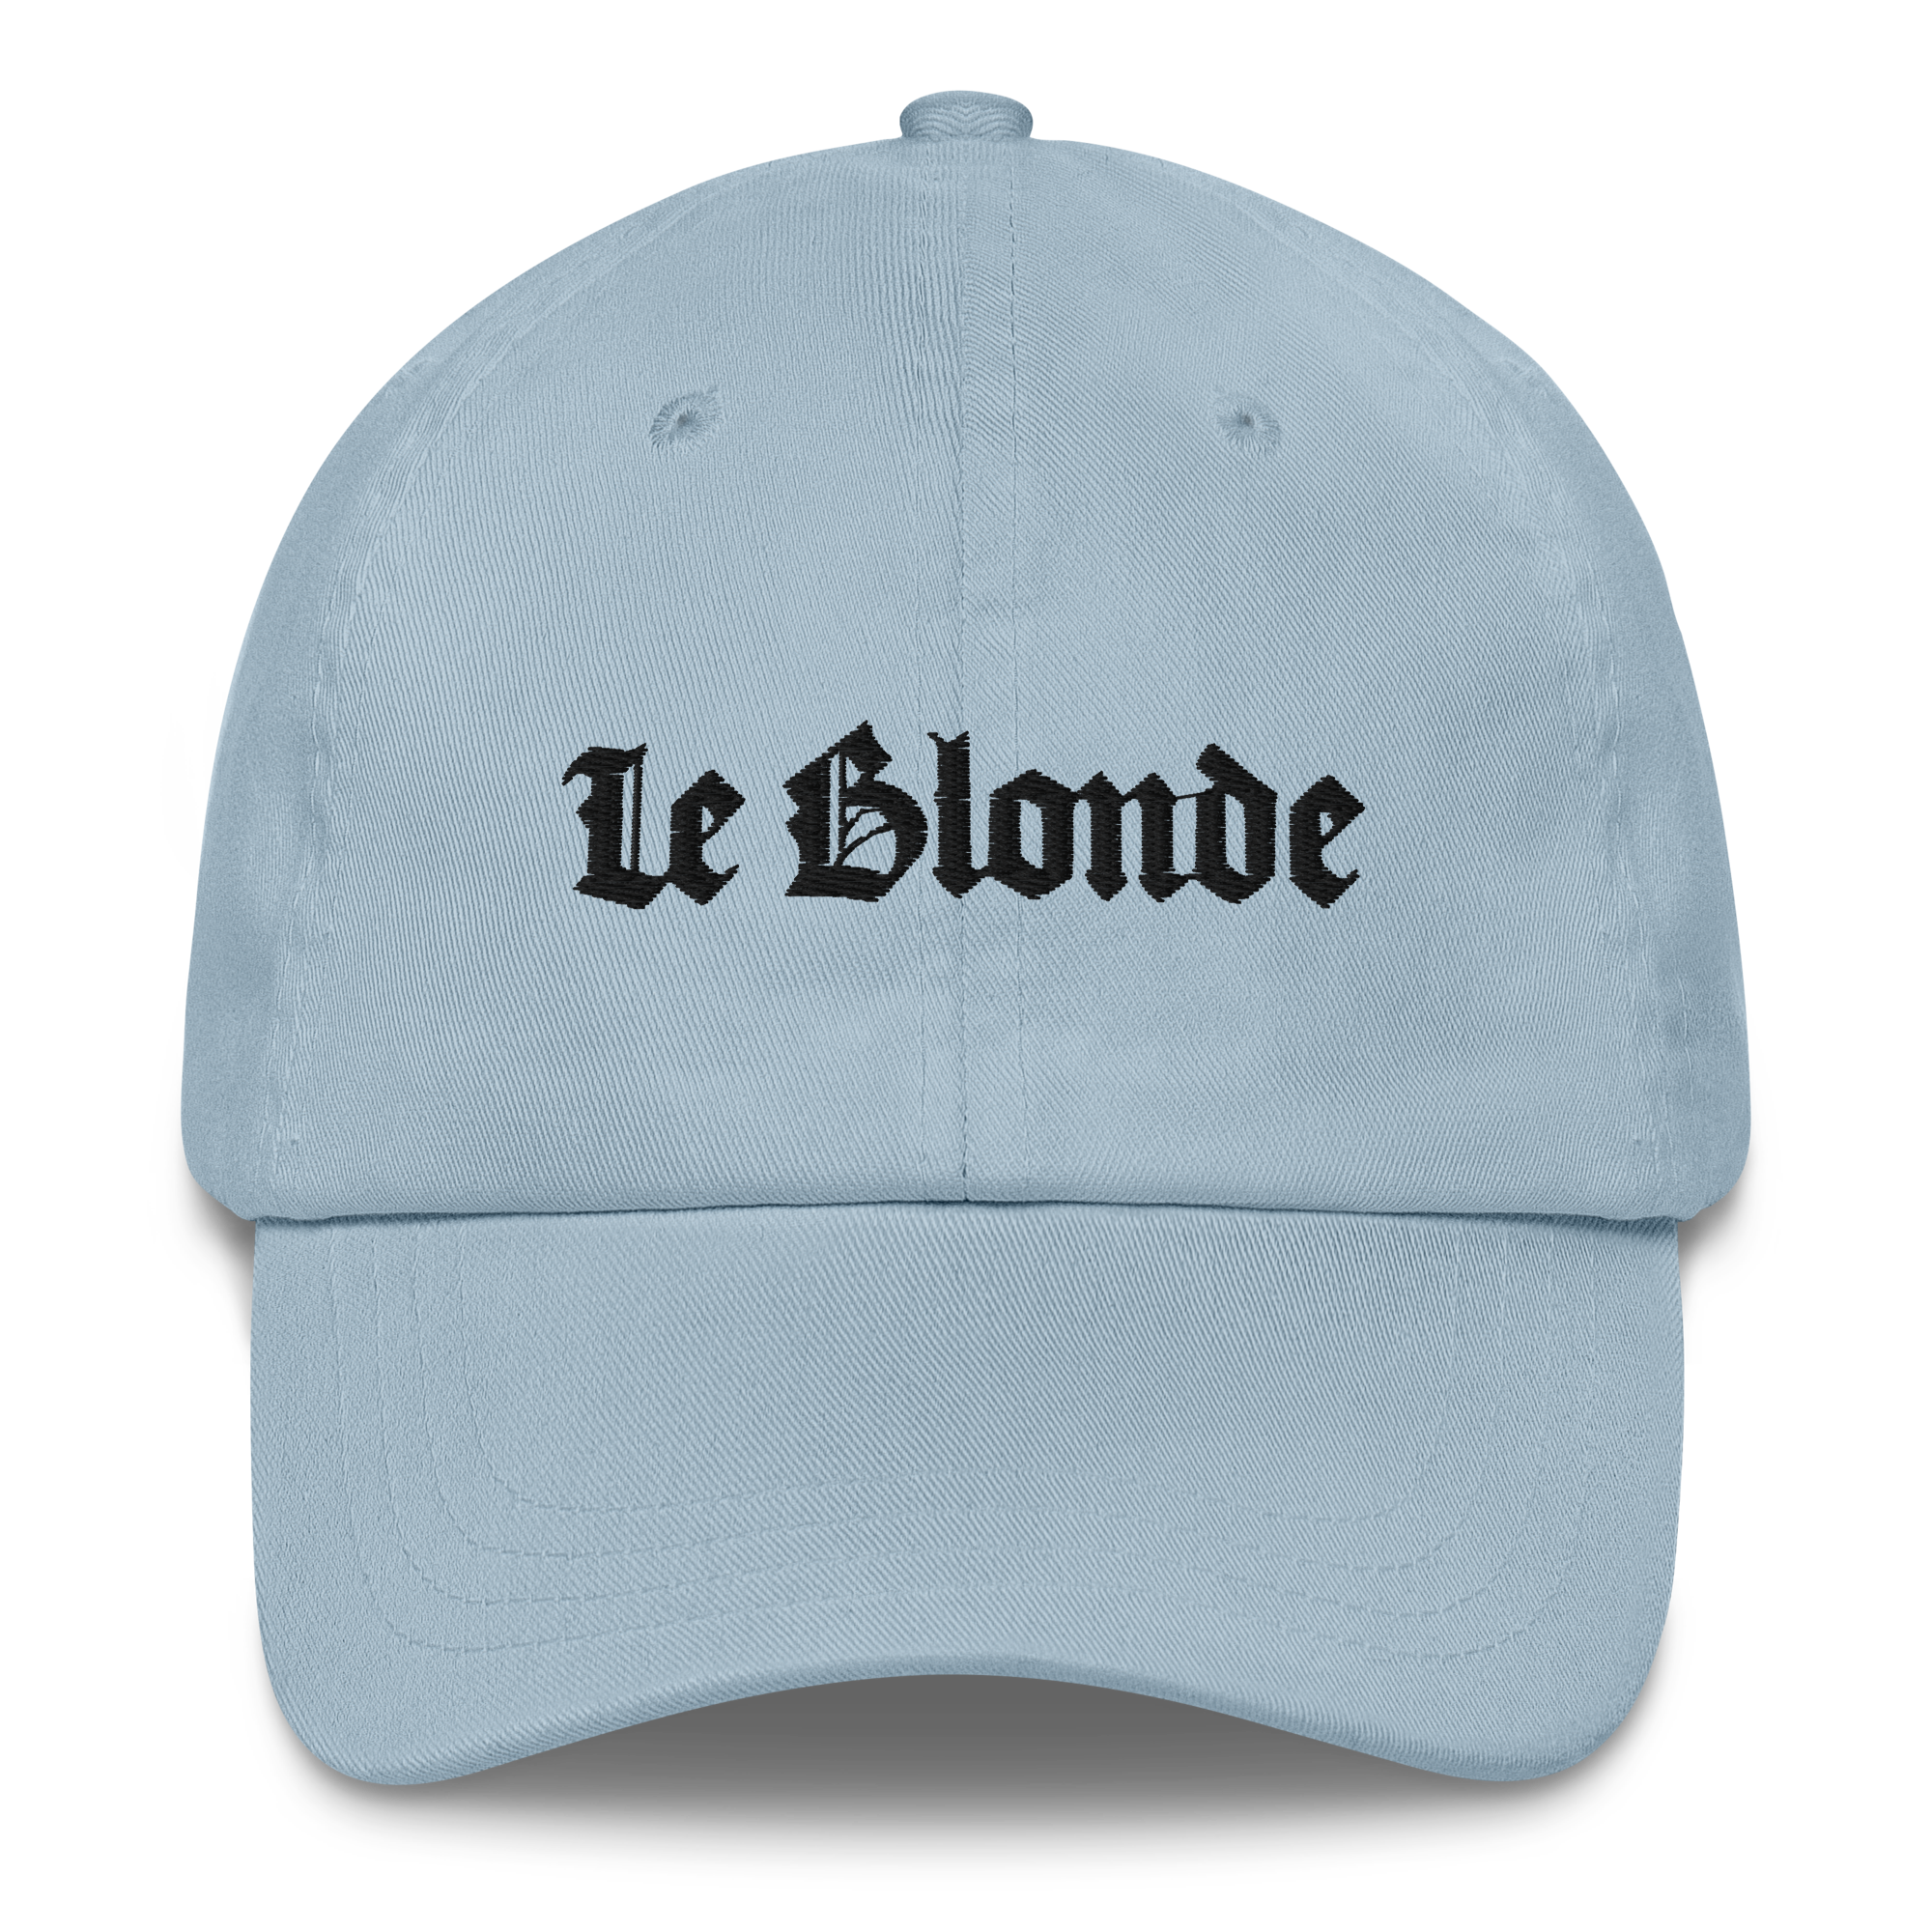 classic-dad-hat-light-blue-front-667b22f266fc0.png